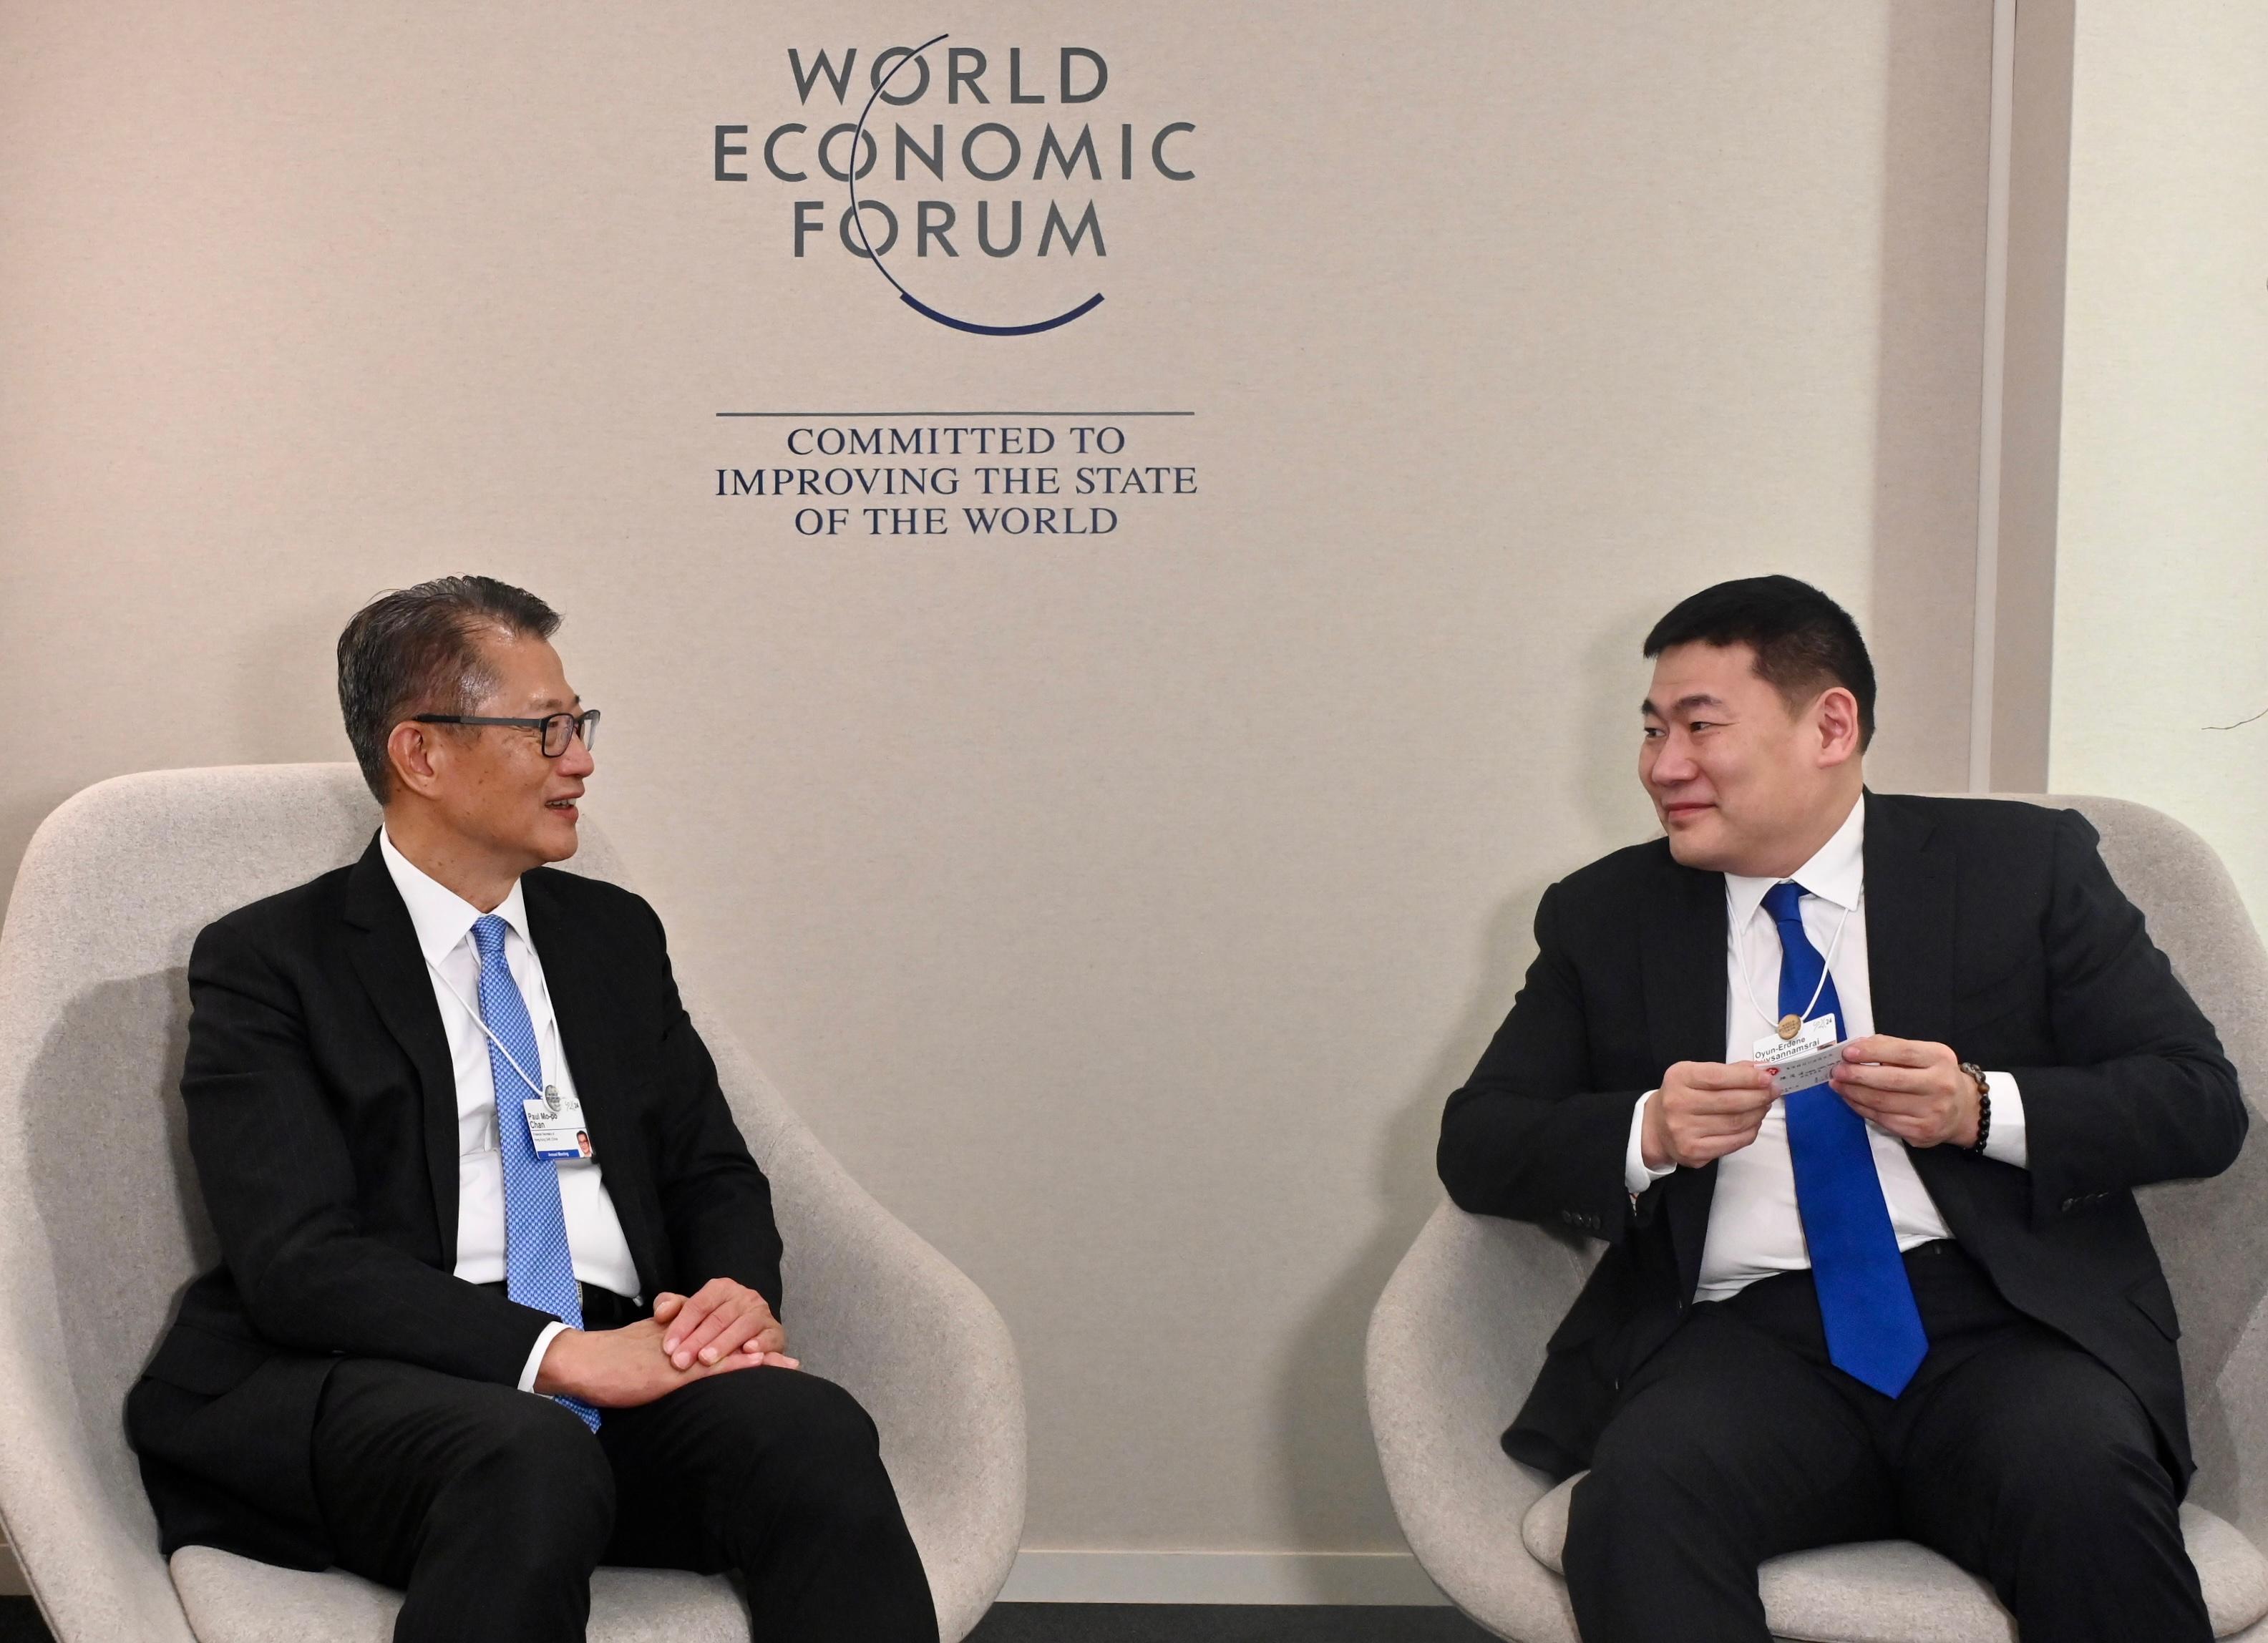 The Financial Secretary, Mr Paul Chan, continued to attend the World Economic Forum Annual Meeting at Davos, Switzerland, yesterday (January 18, Davos time). Photo shows Mr Chan (left) meeting with the Prime Minister of Mongolia, Mr Oyun-Erdene Luvsannamsrai (right).